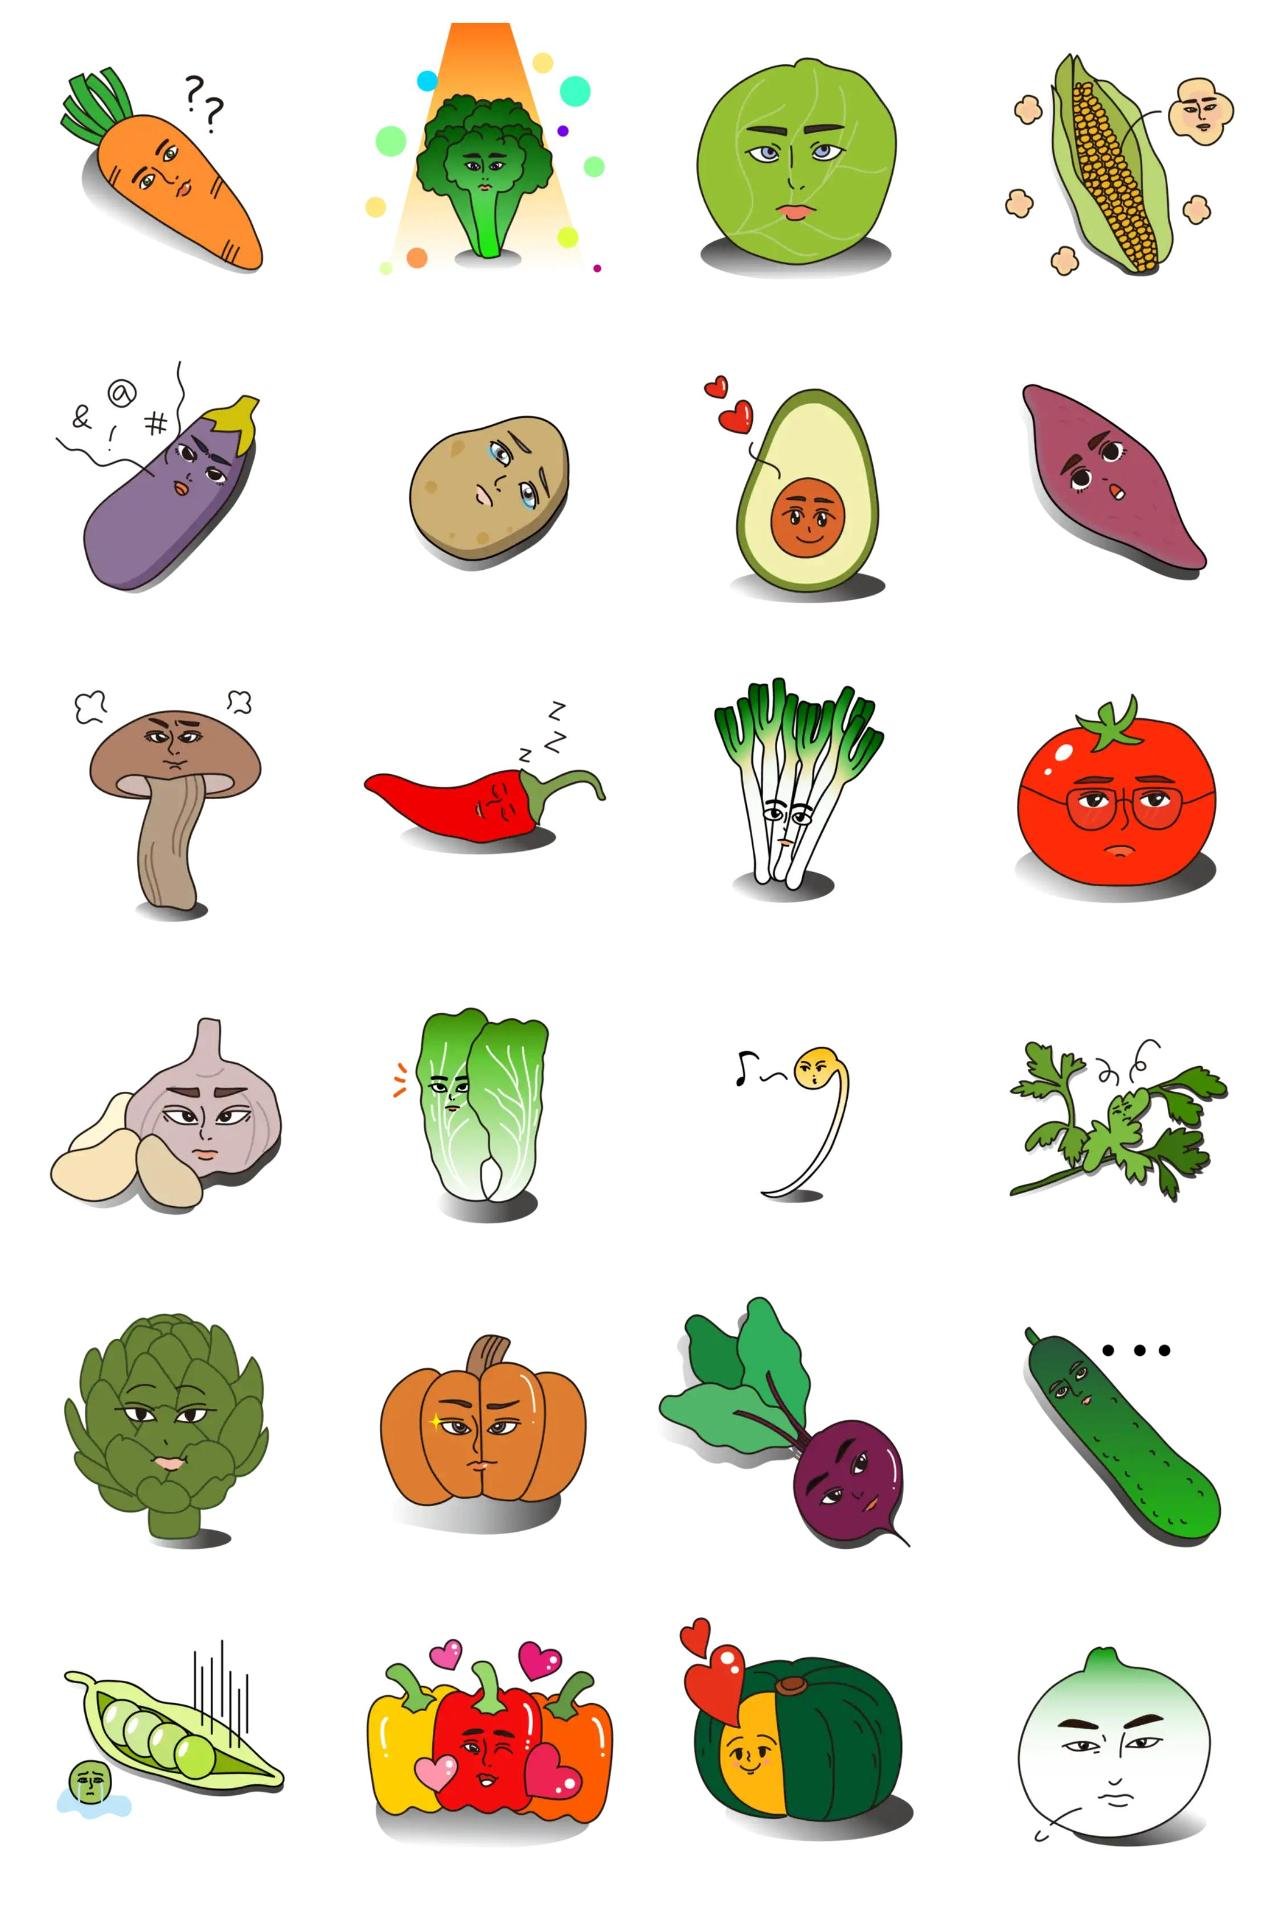 Handsome vegetables Etc. sticker pack for Whatsapp, Telegram, Signal, and others chatting and message apps